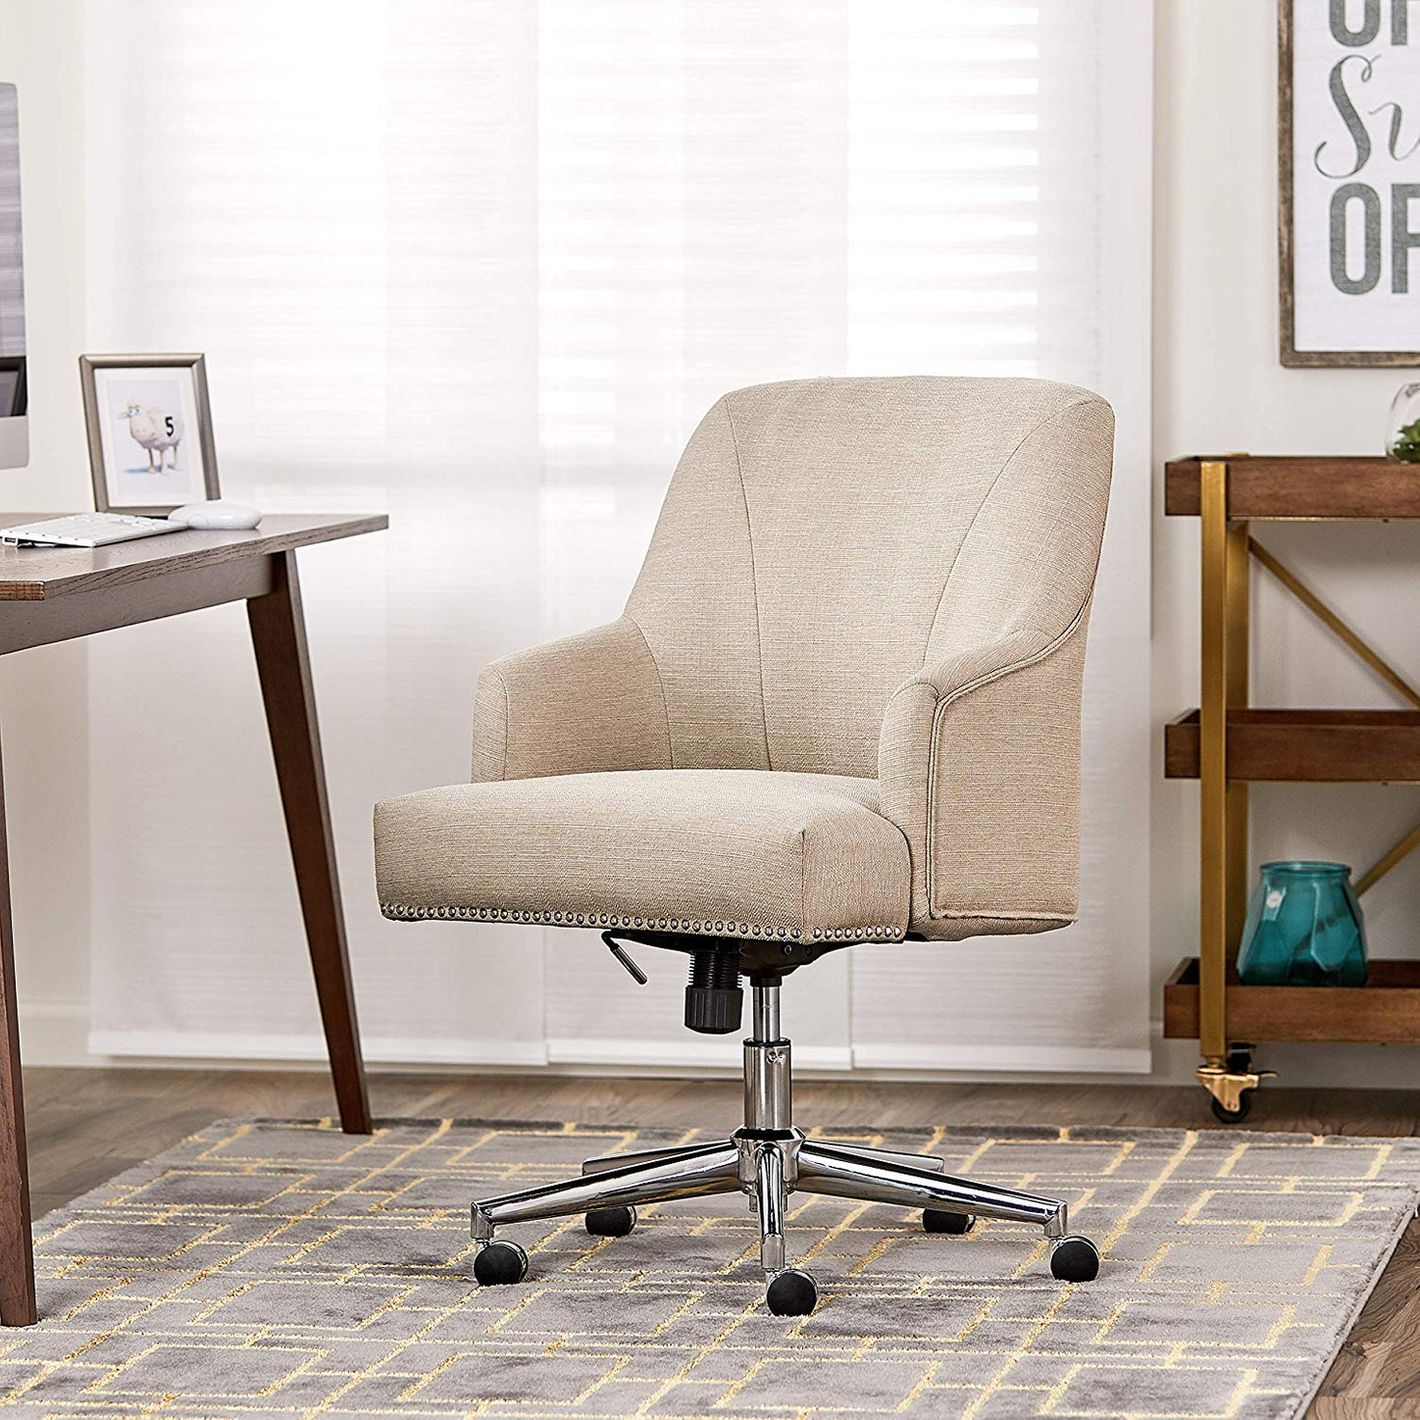 19 Best Office Chairs and Home-Office Chairs 2019